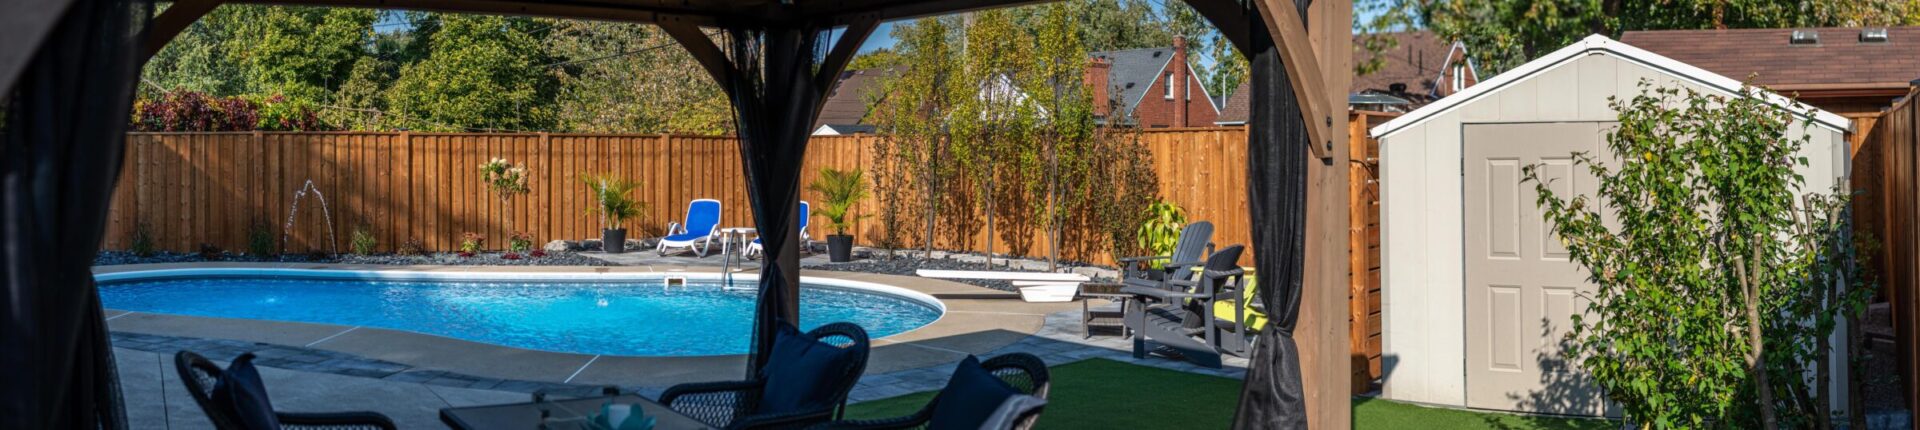 Panoramic view from a shaded patio of a sunlit backyard with an inviting swimming pool, lounge chairs, a neat fence, and a storage shed.